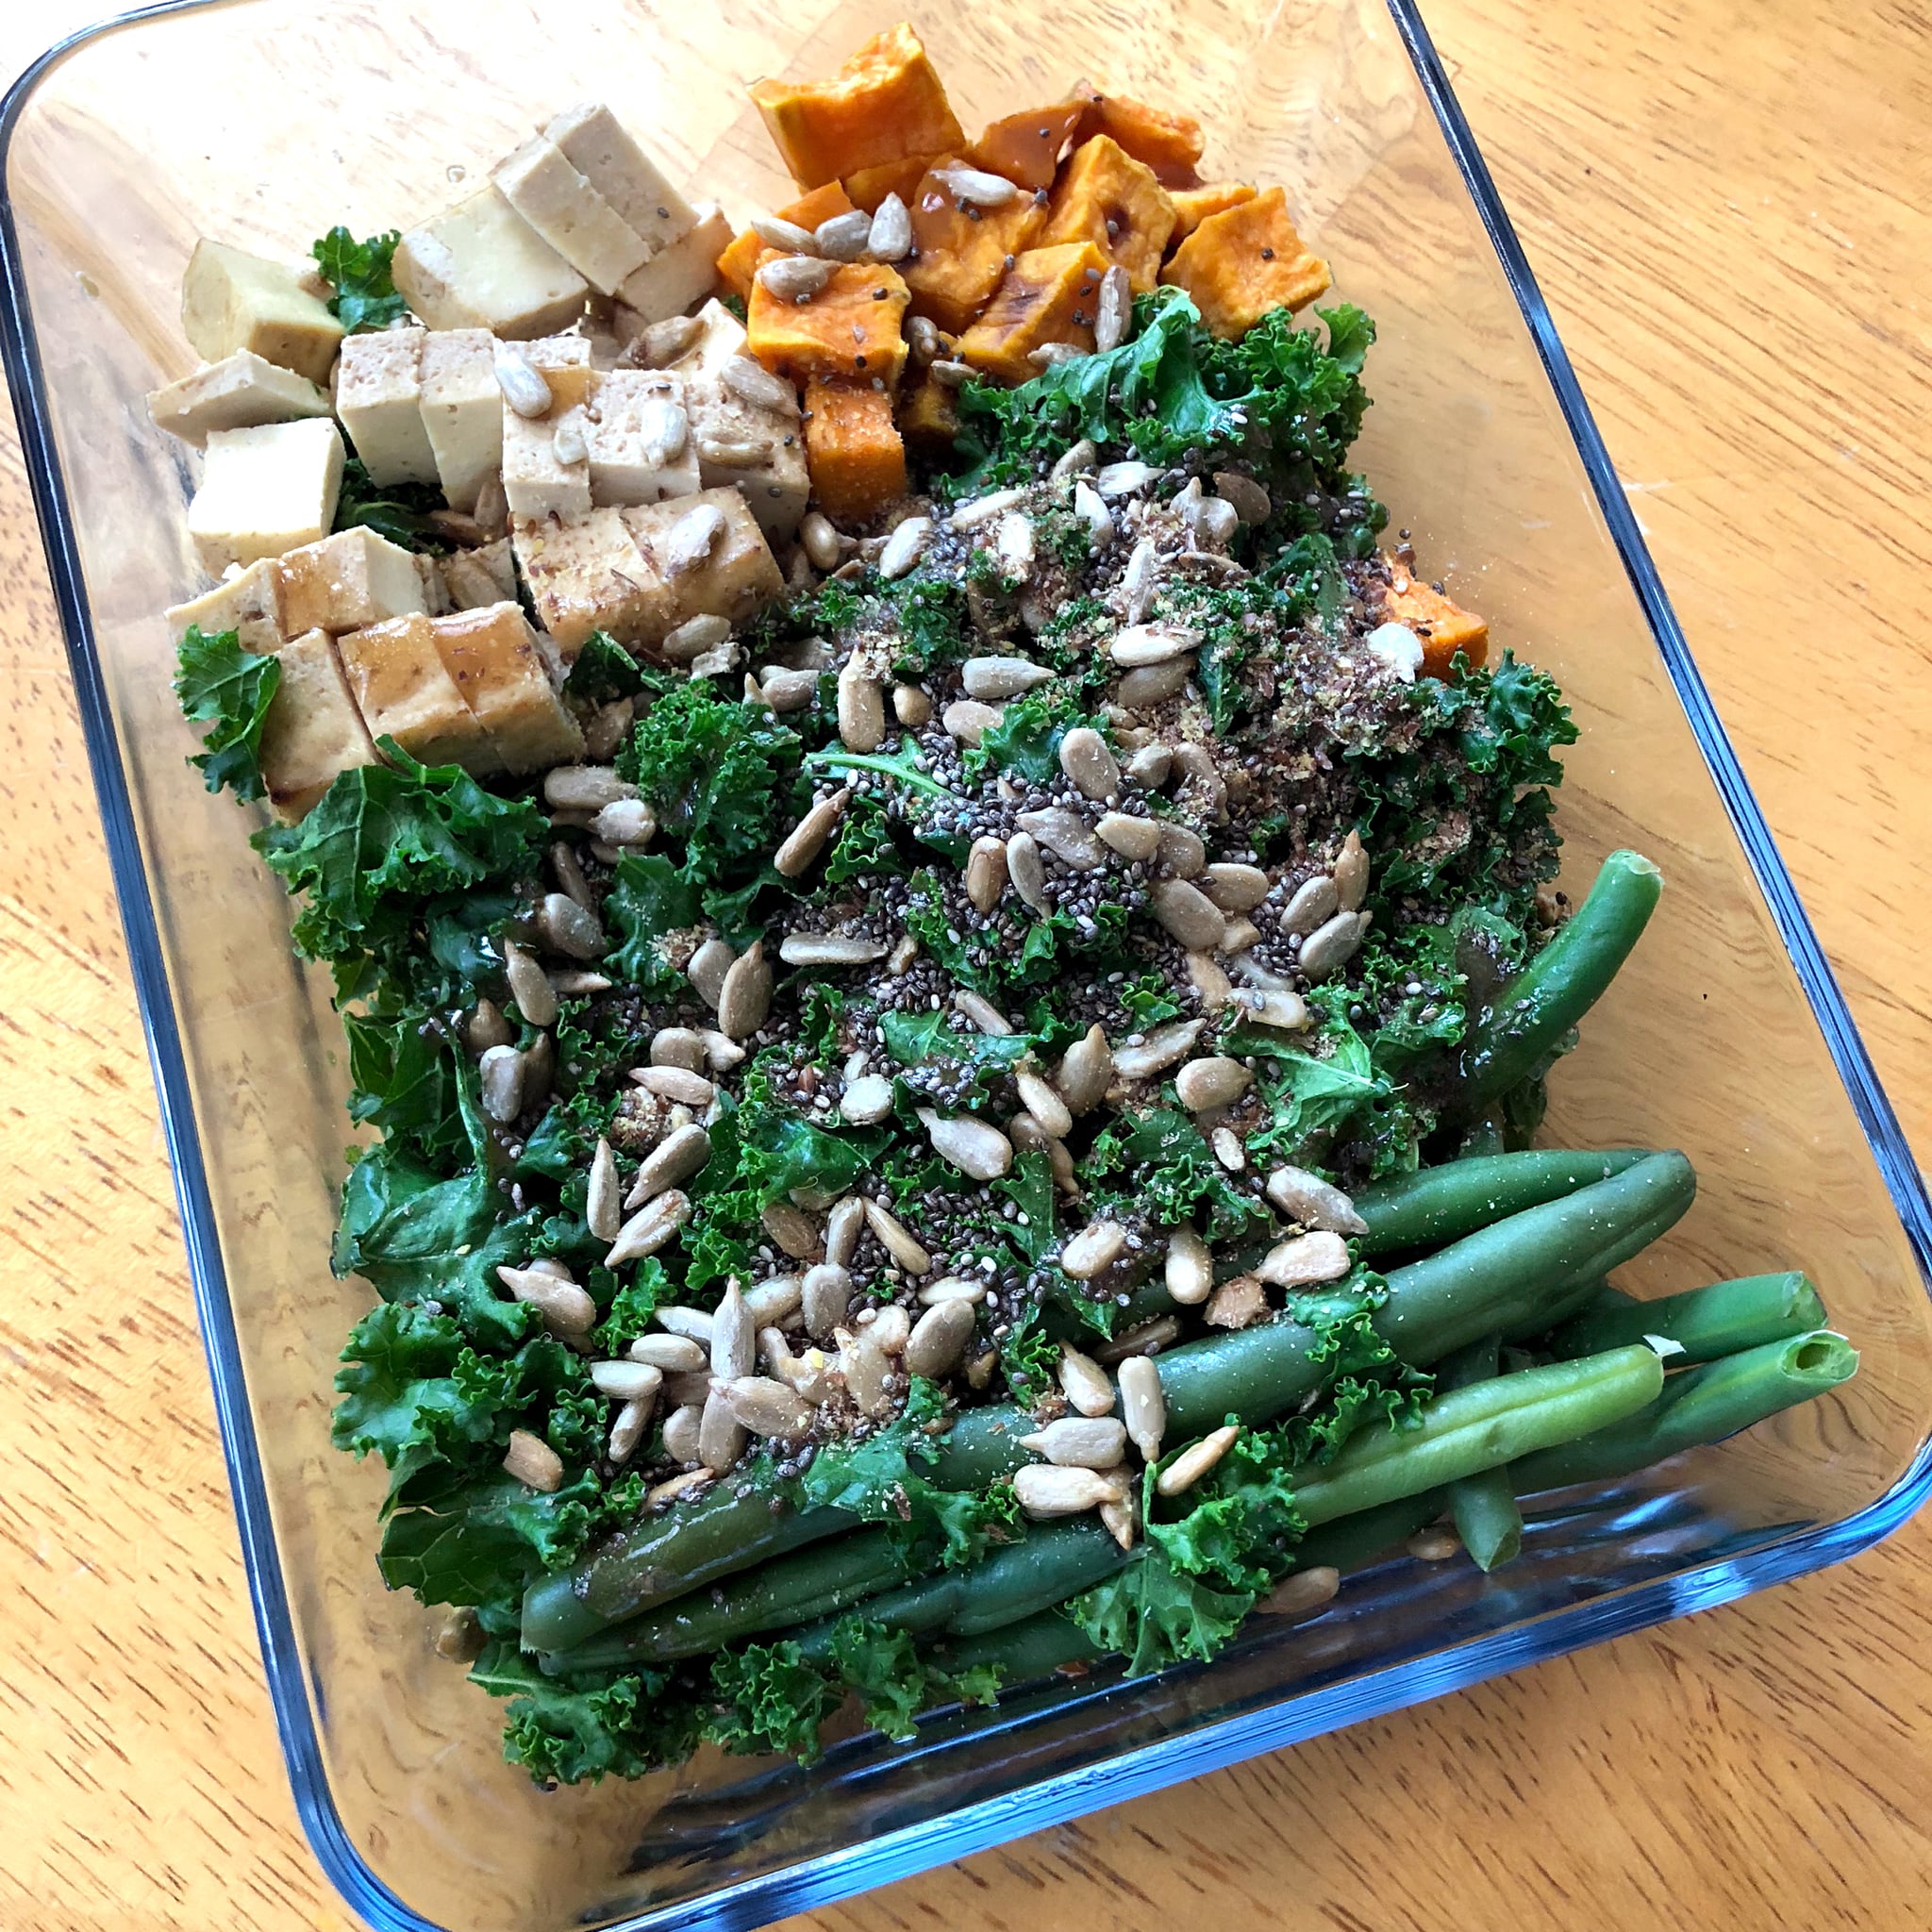 12 p.m. — Kale Salad With Tofu, Green Beans, and Sweet Potatoes